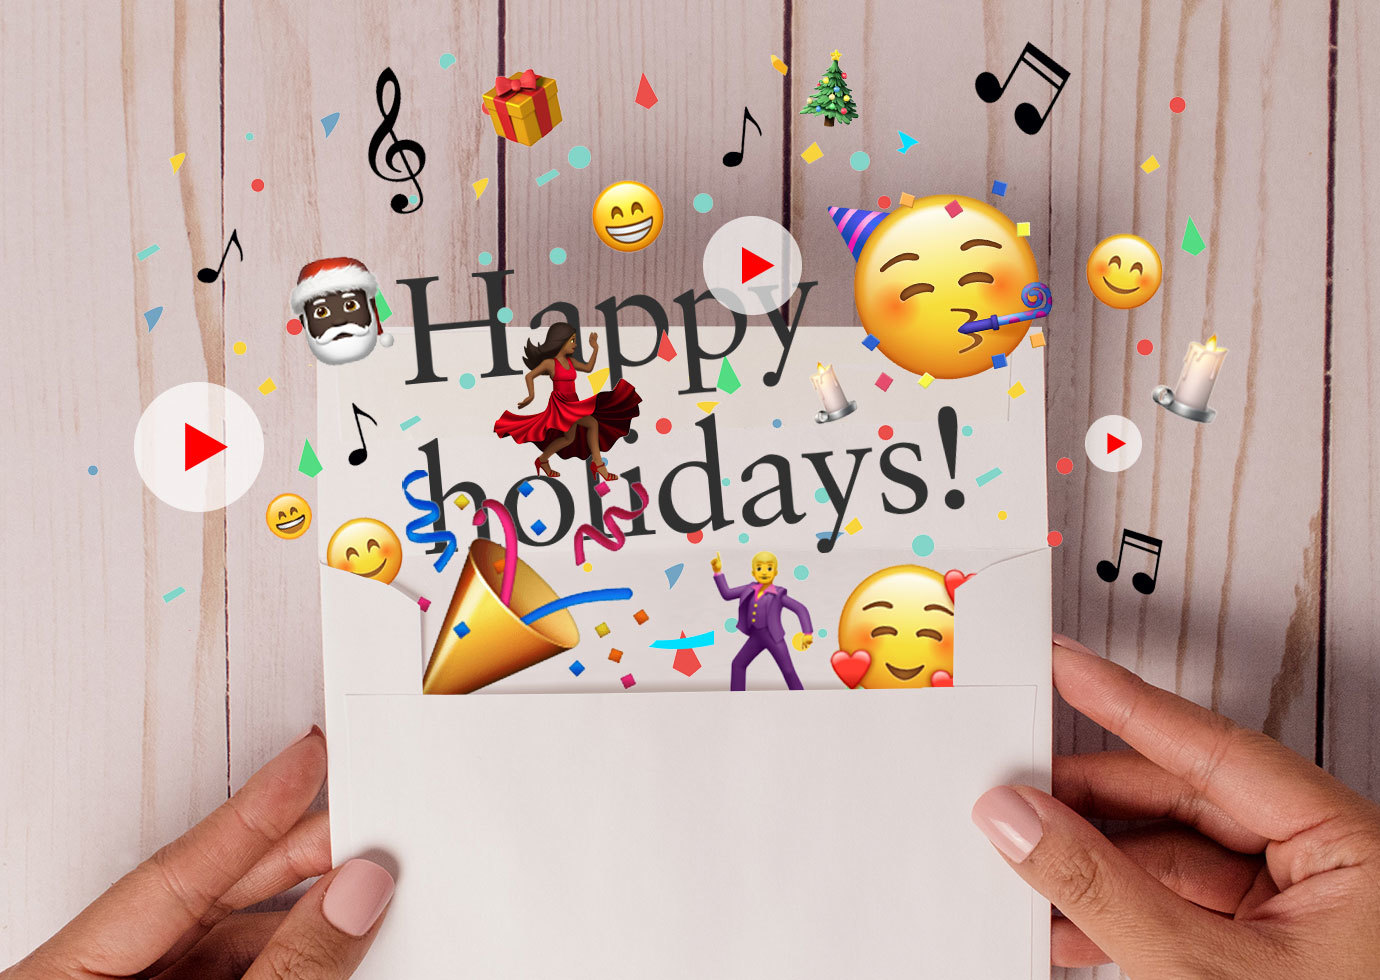 Hands holding an envelope with a holiday card and confetti, musical notes, and happy emojis coming out of it.